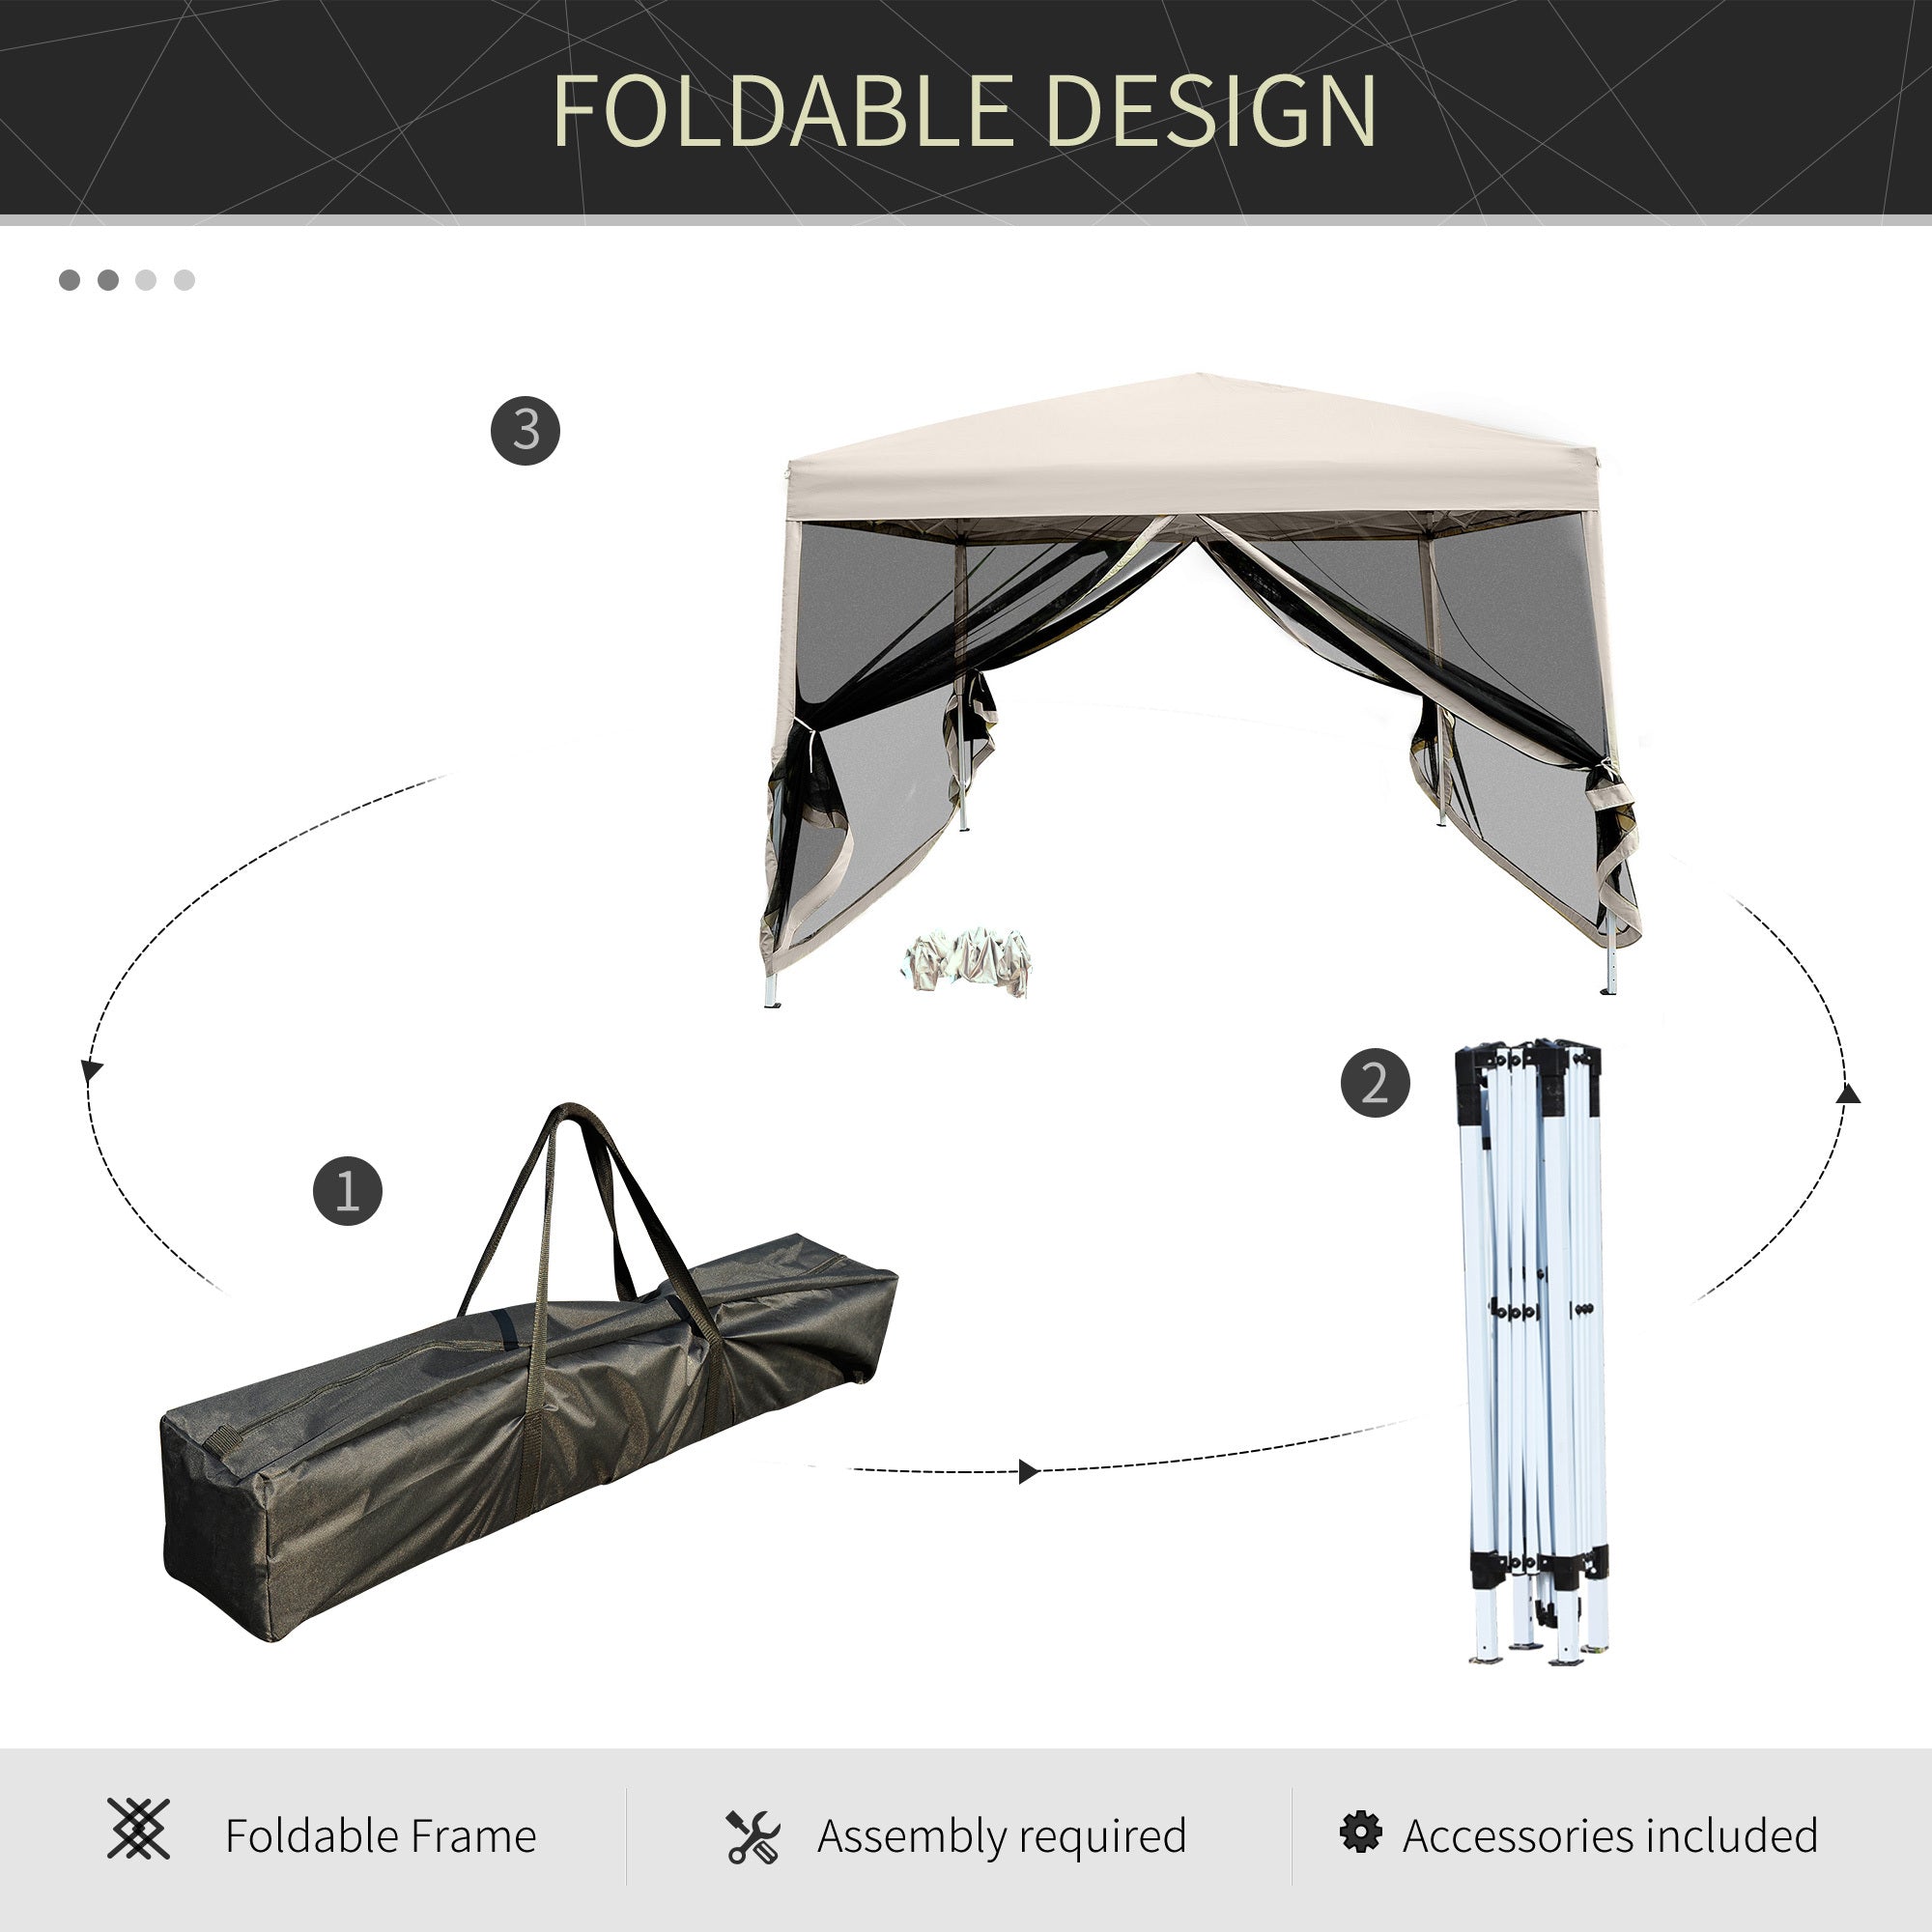 210d Oxford 10' x 10' Pop Up Canopy Tent with